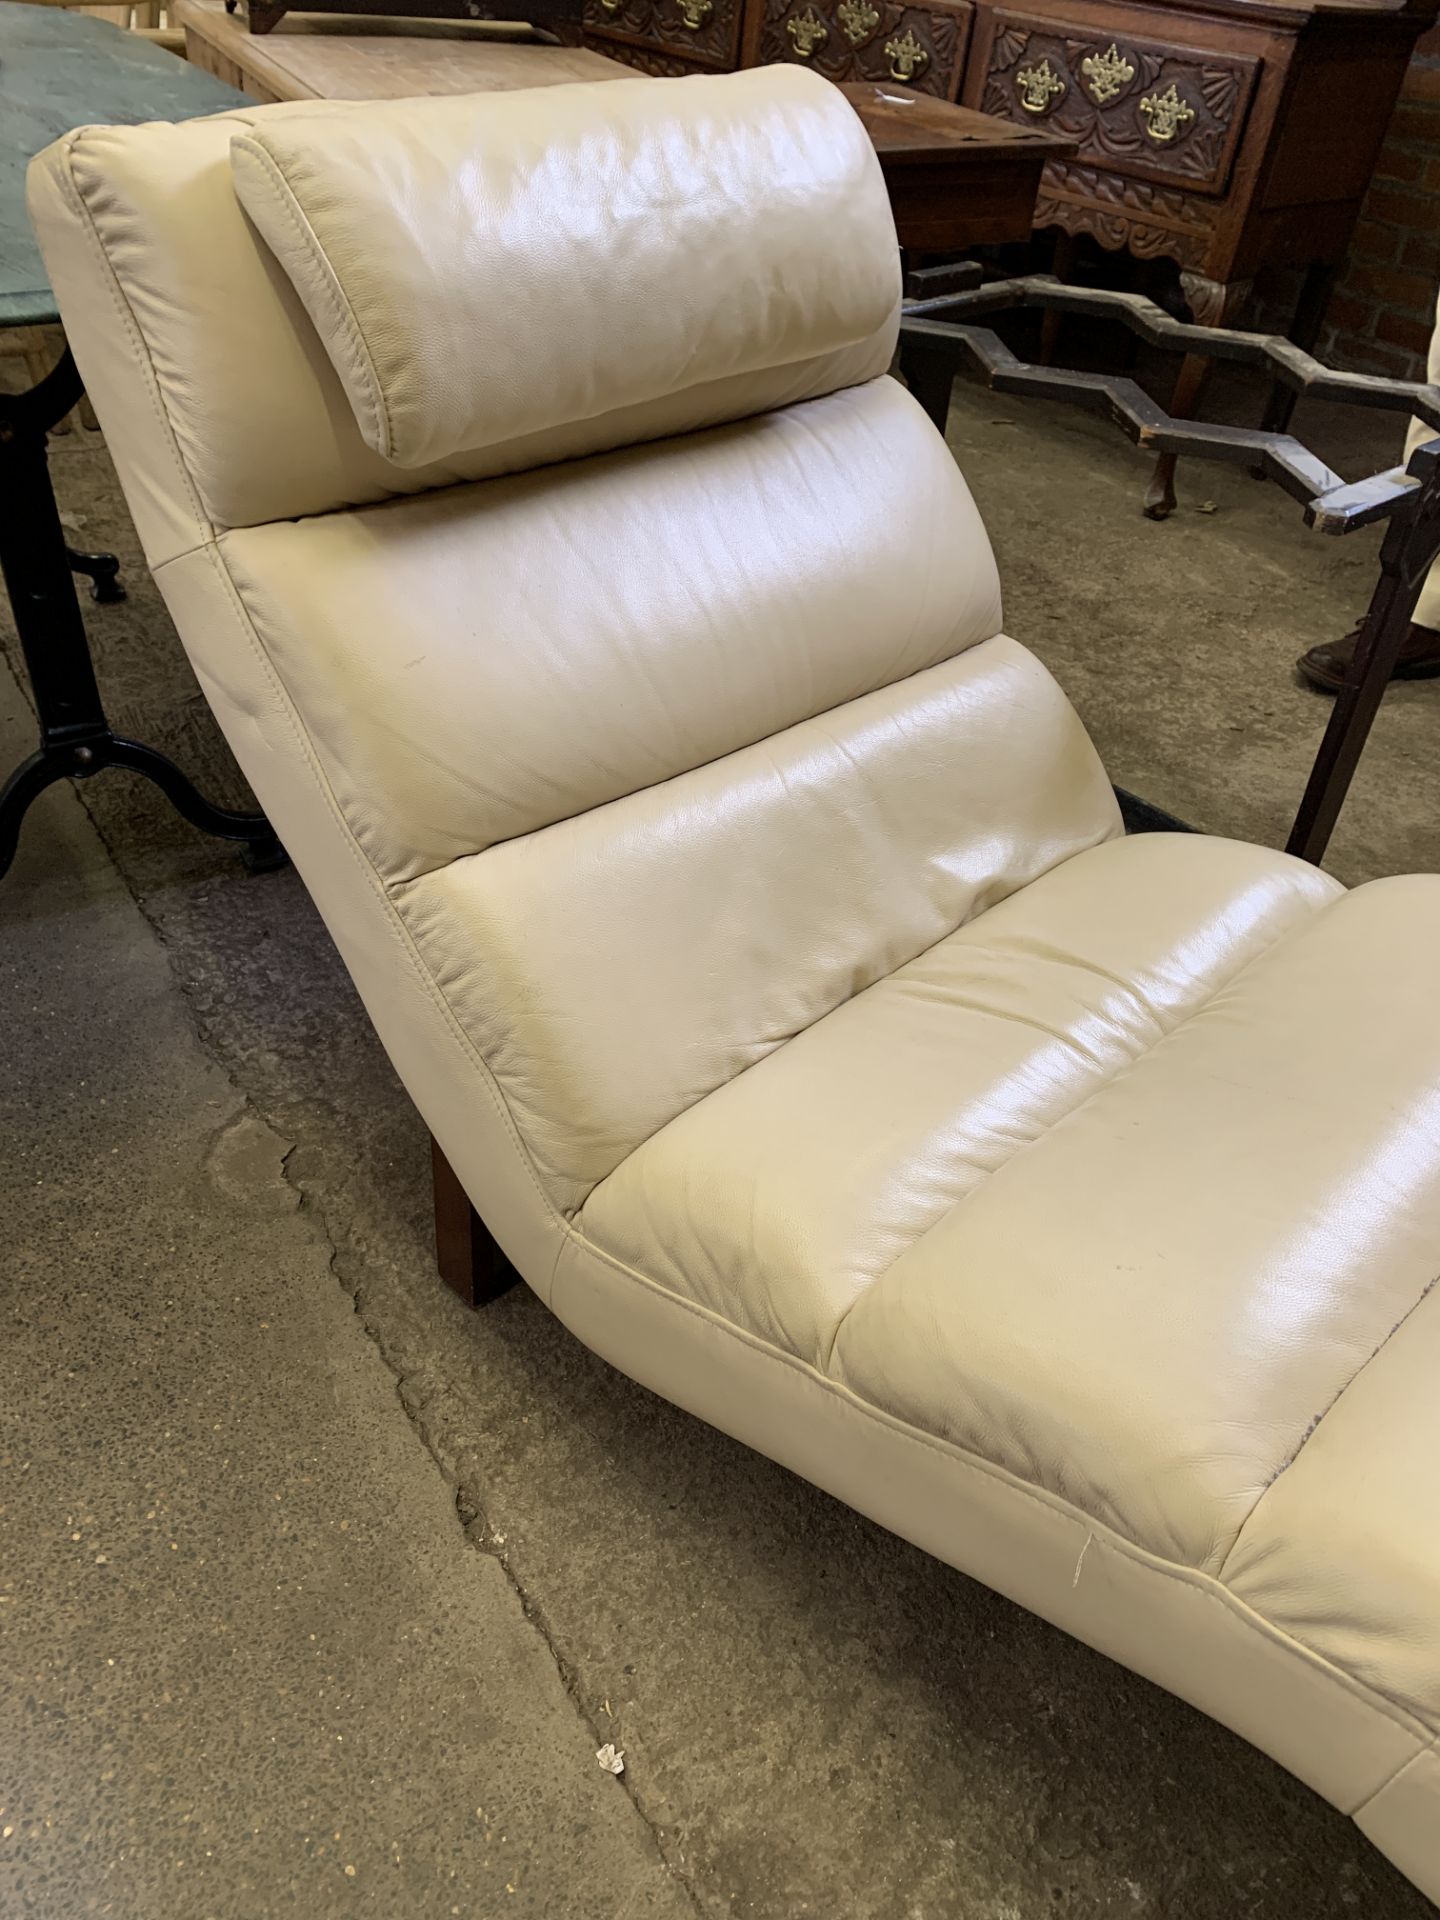 Cream leather modern chaise longue - Image 2 of 4